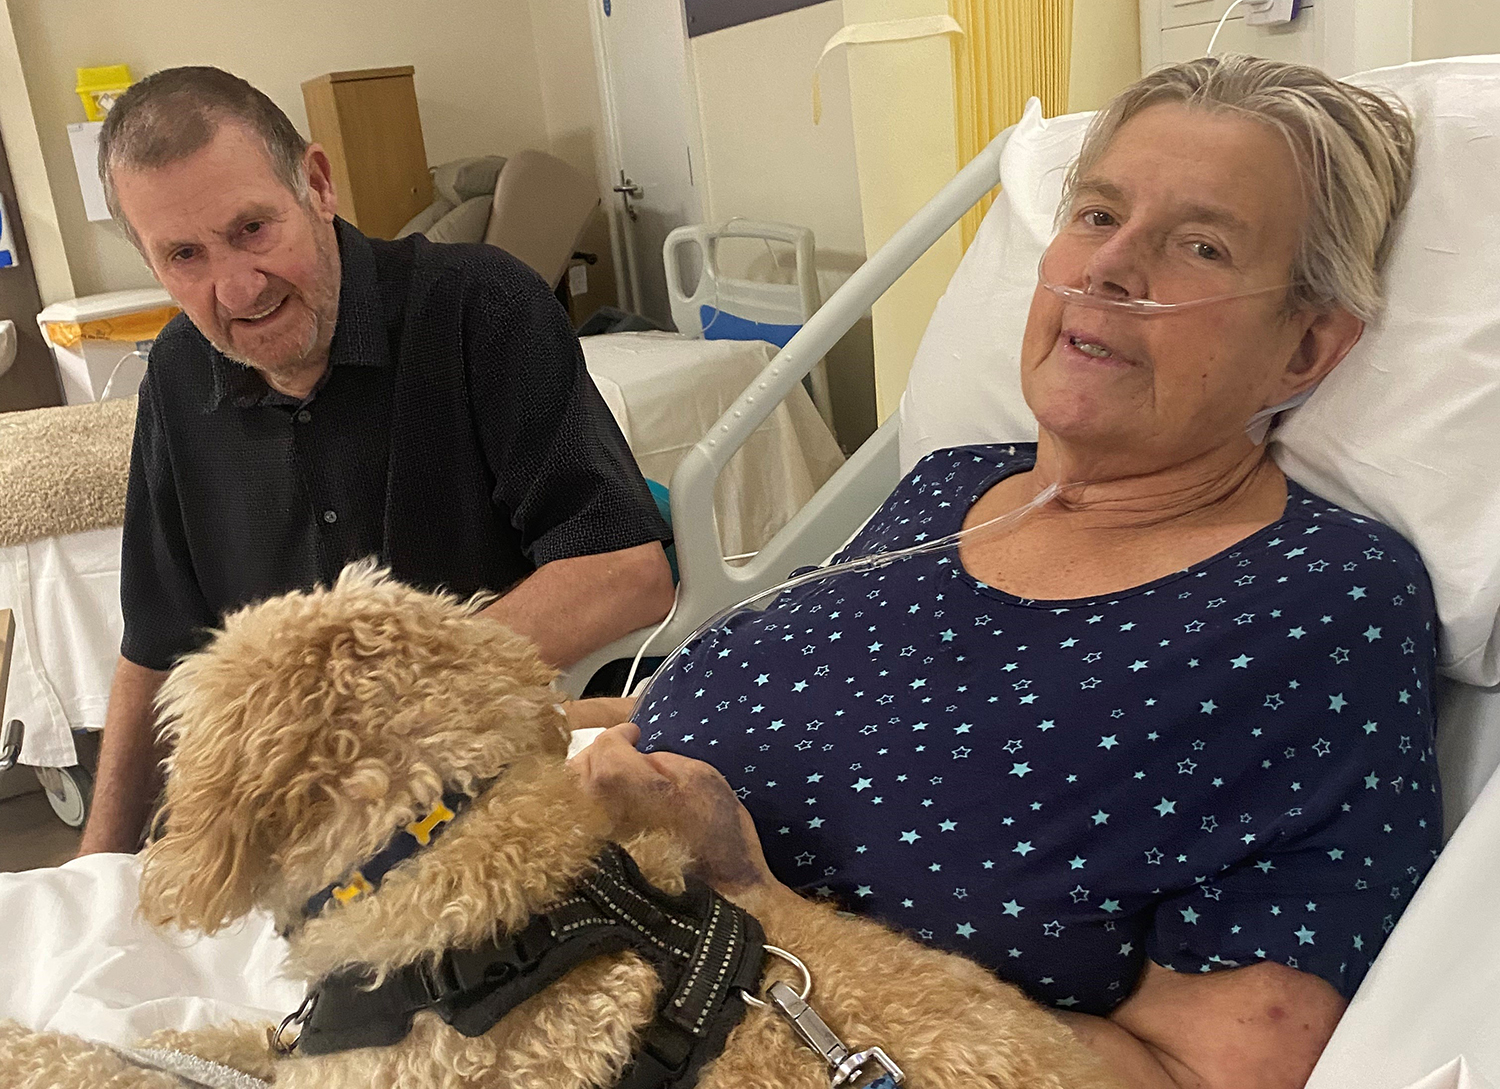 Woman in hospital bed with man by her side and brown dog on the bed